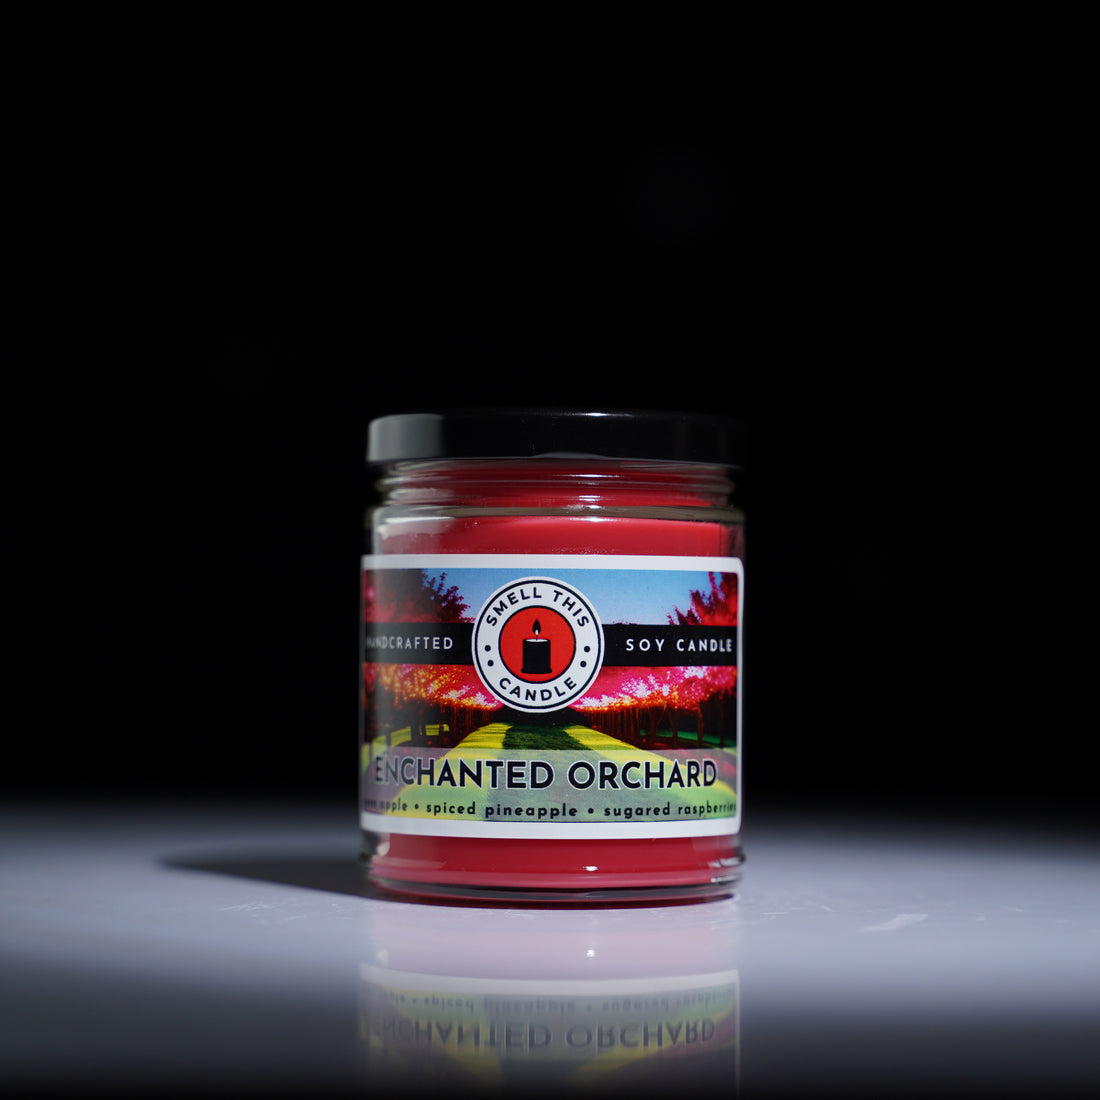 Enchanted Orchard candle